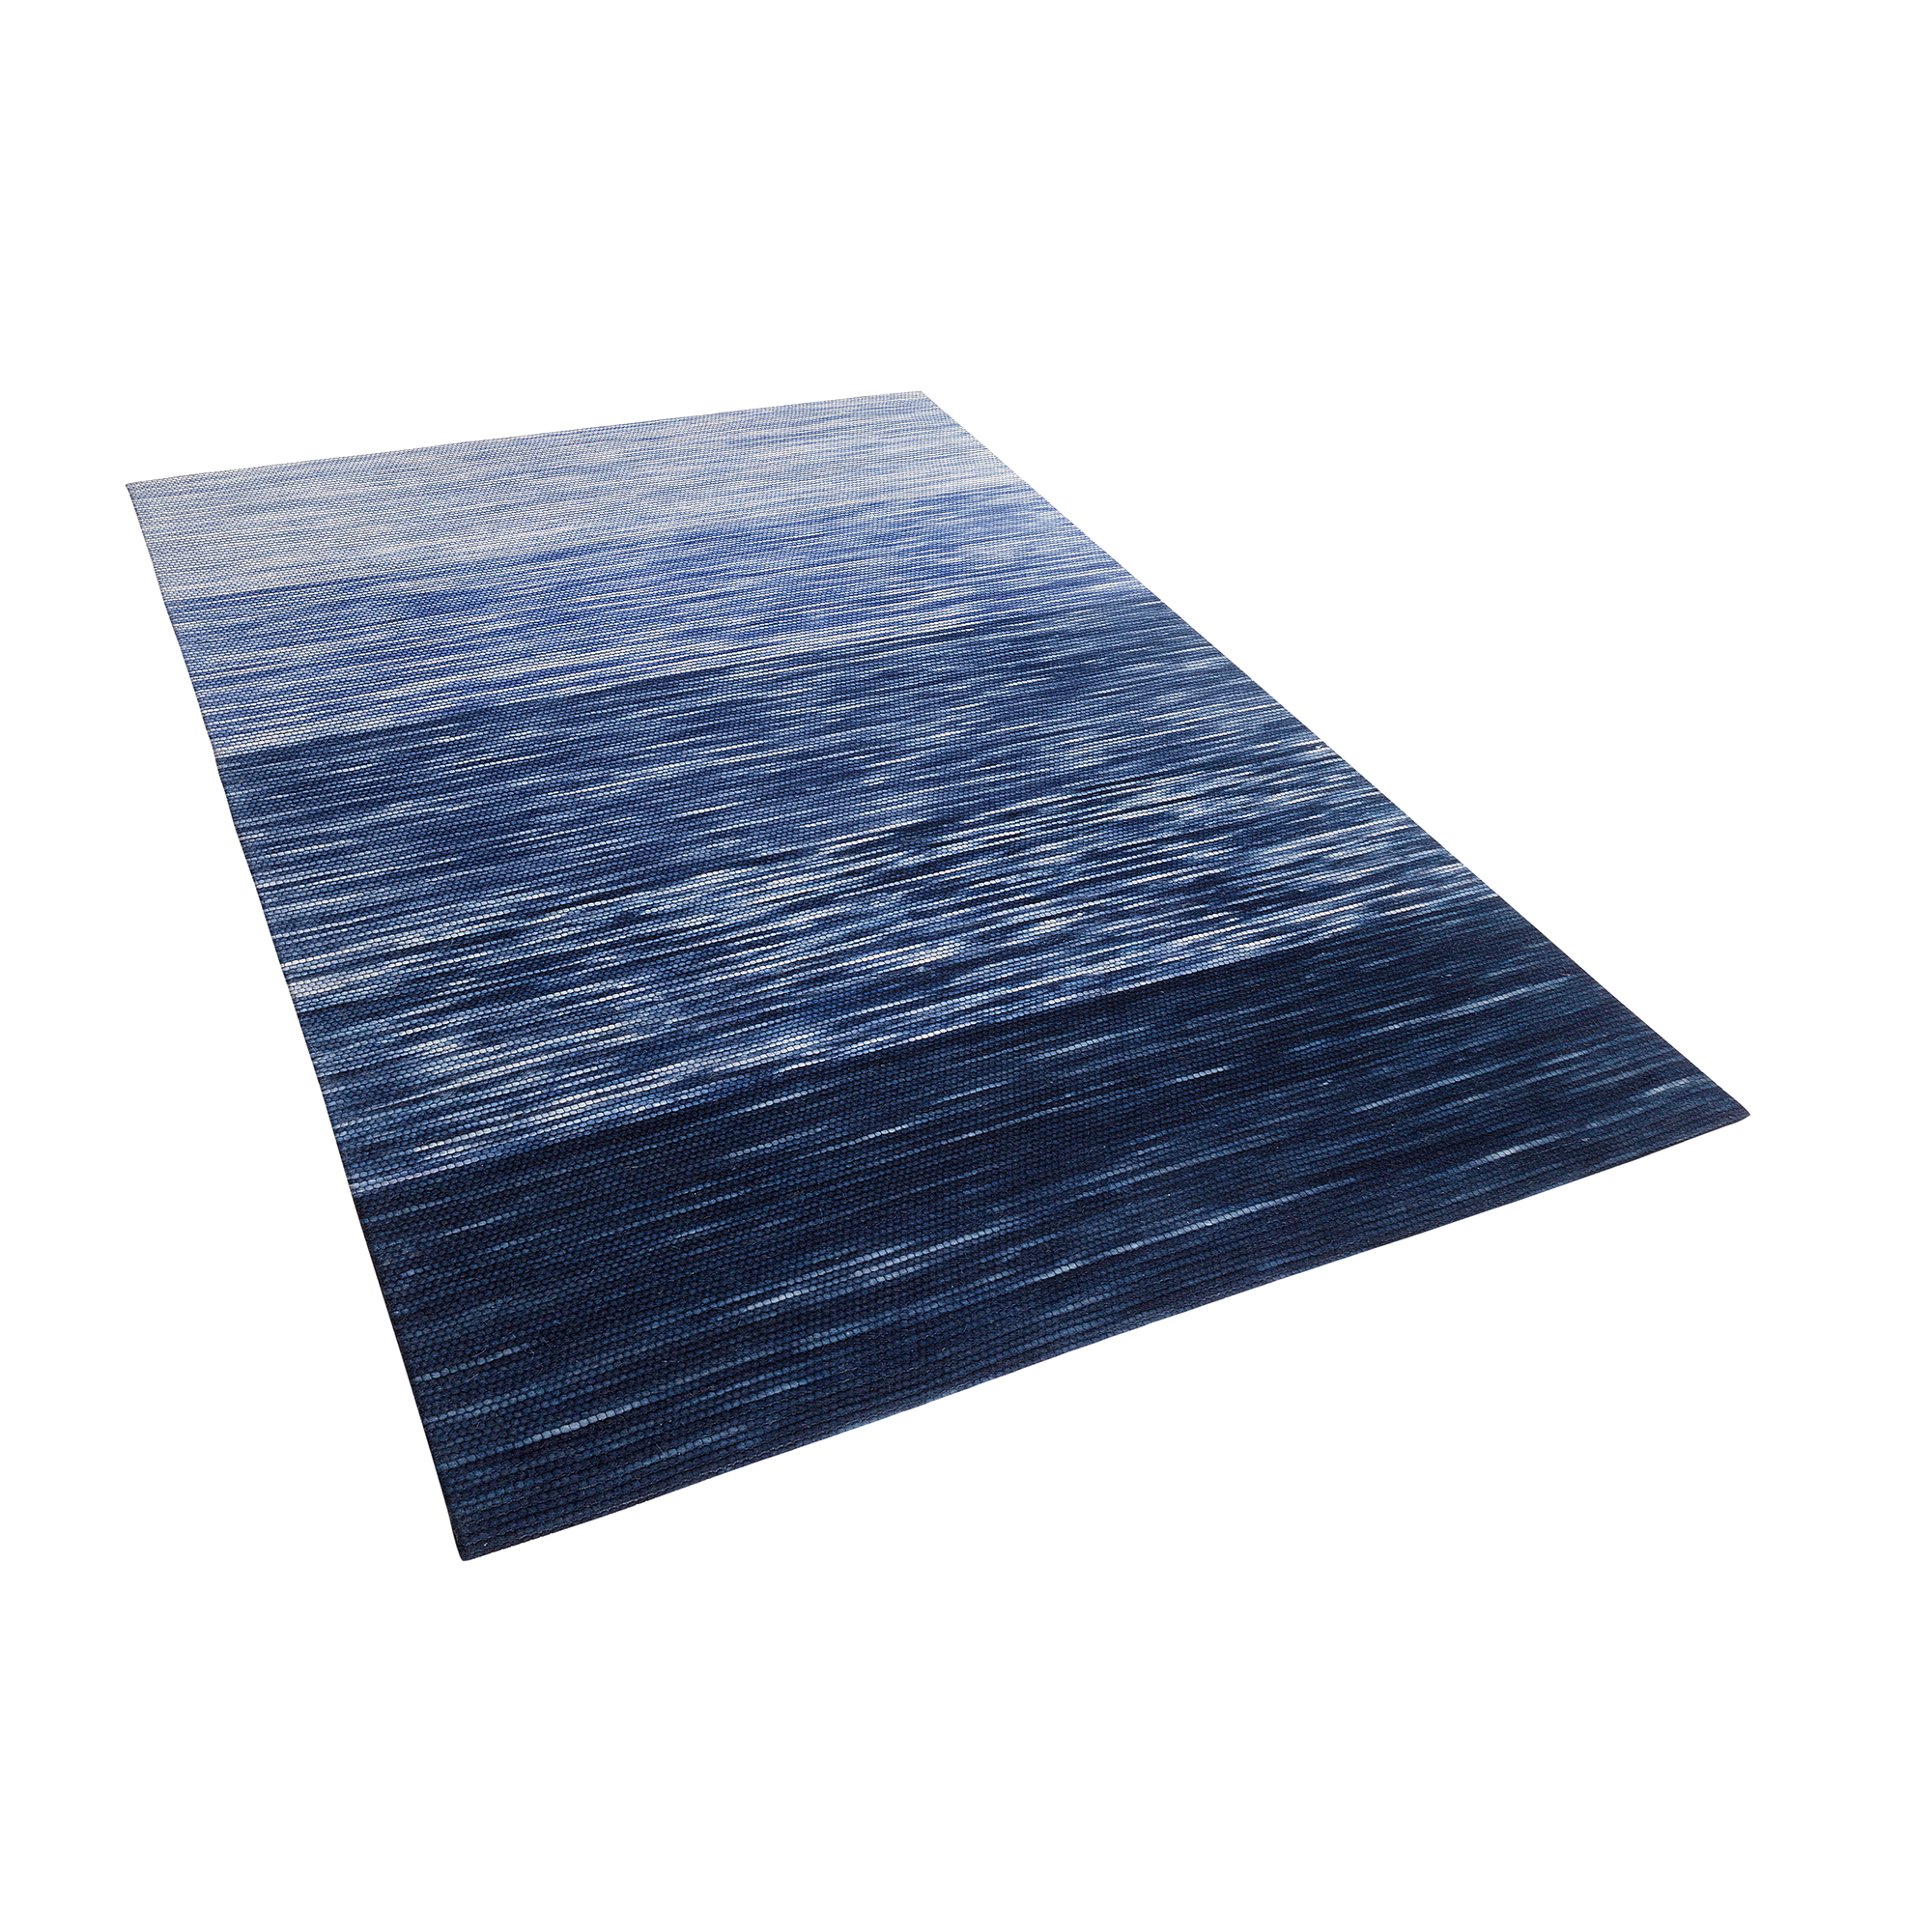 Beliani Rug Blue Wool and Polyester 140 x 200 cm Hand Woven Modern Design